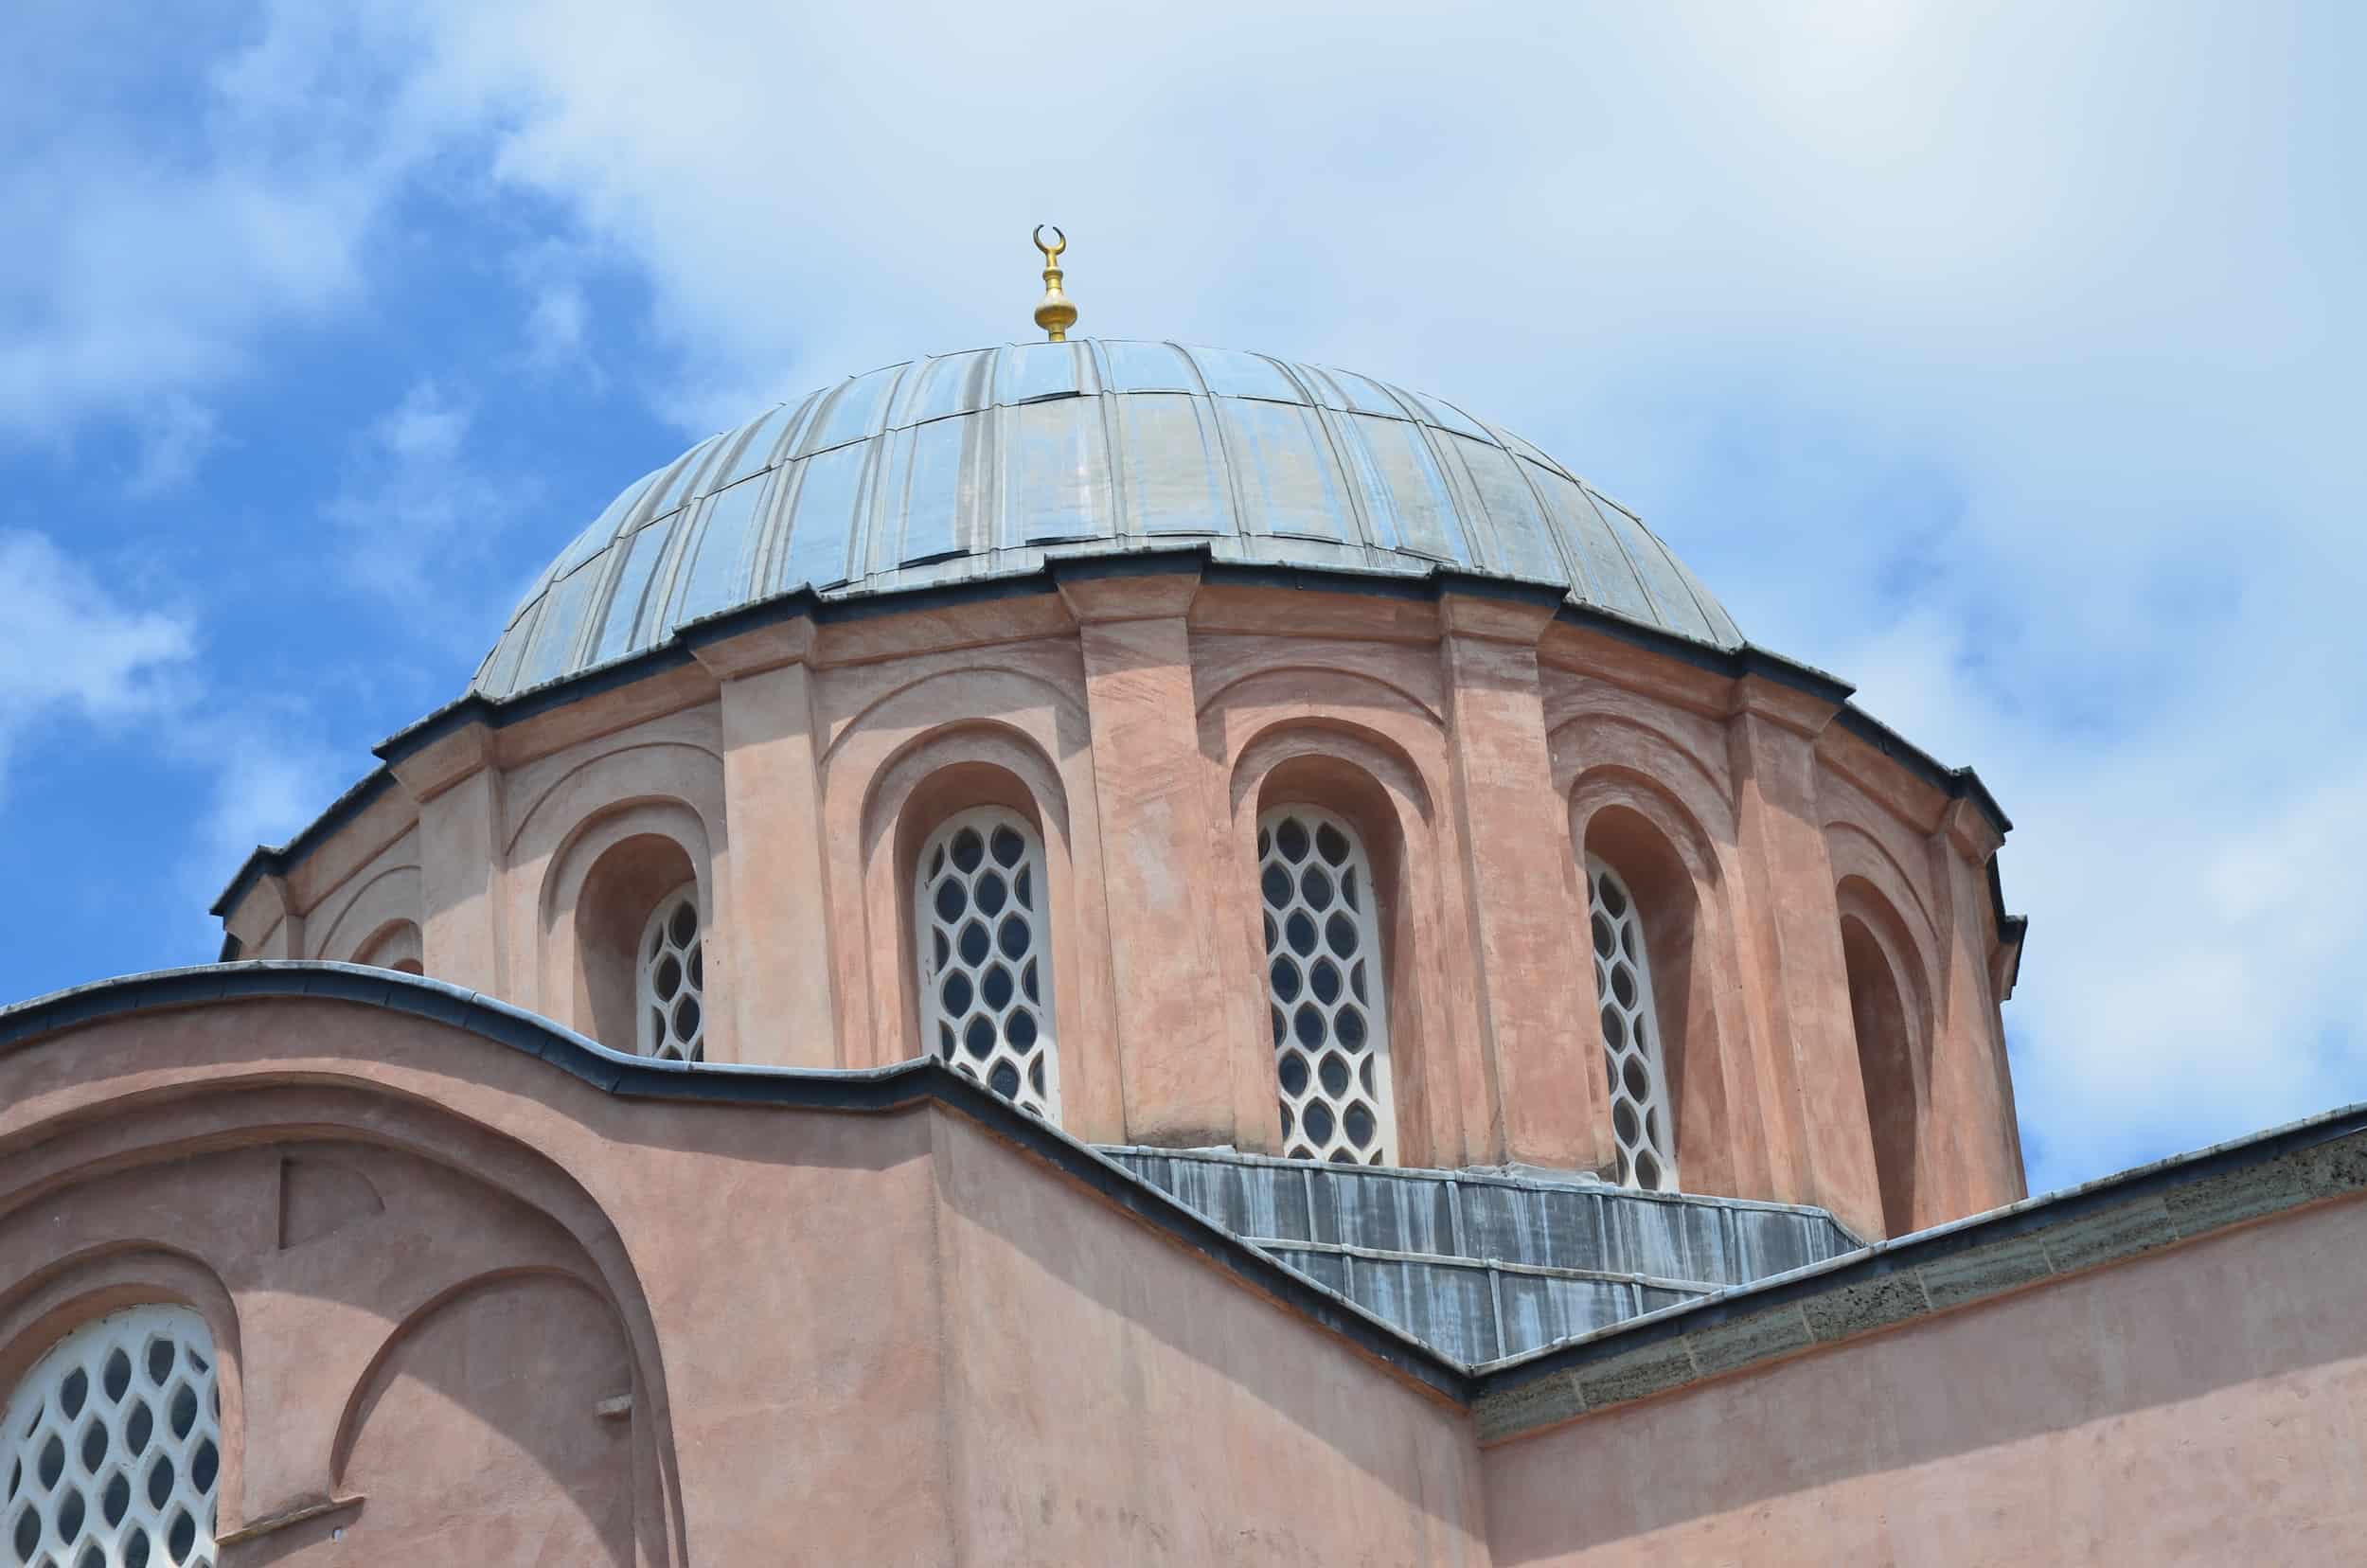 Central dome of the south church of the Zeyrek Mosque in Zeyrek, Istanbul, Turkey